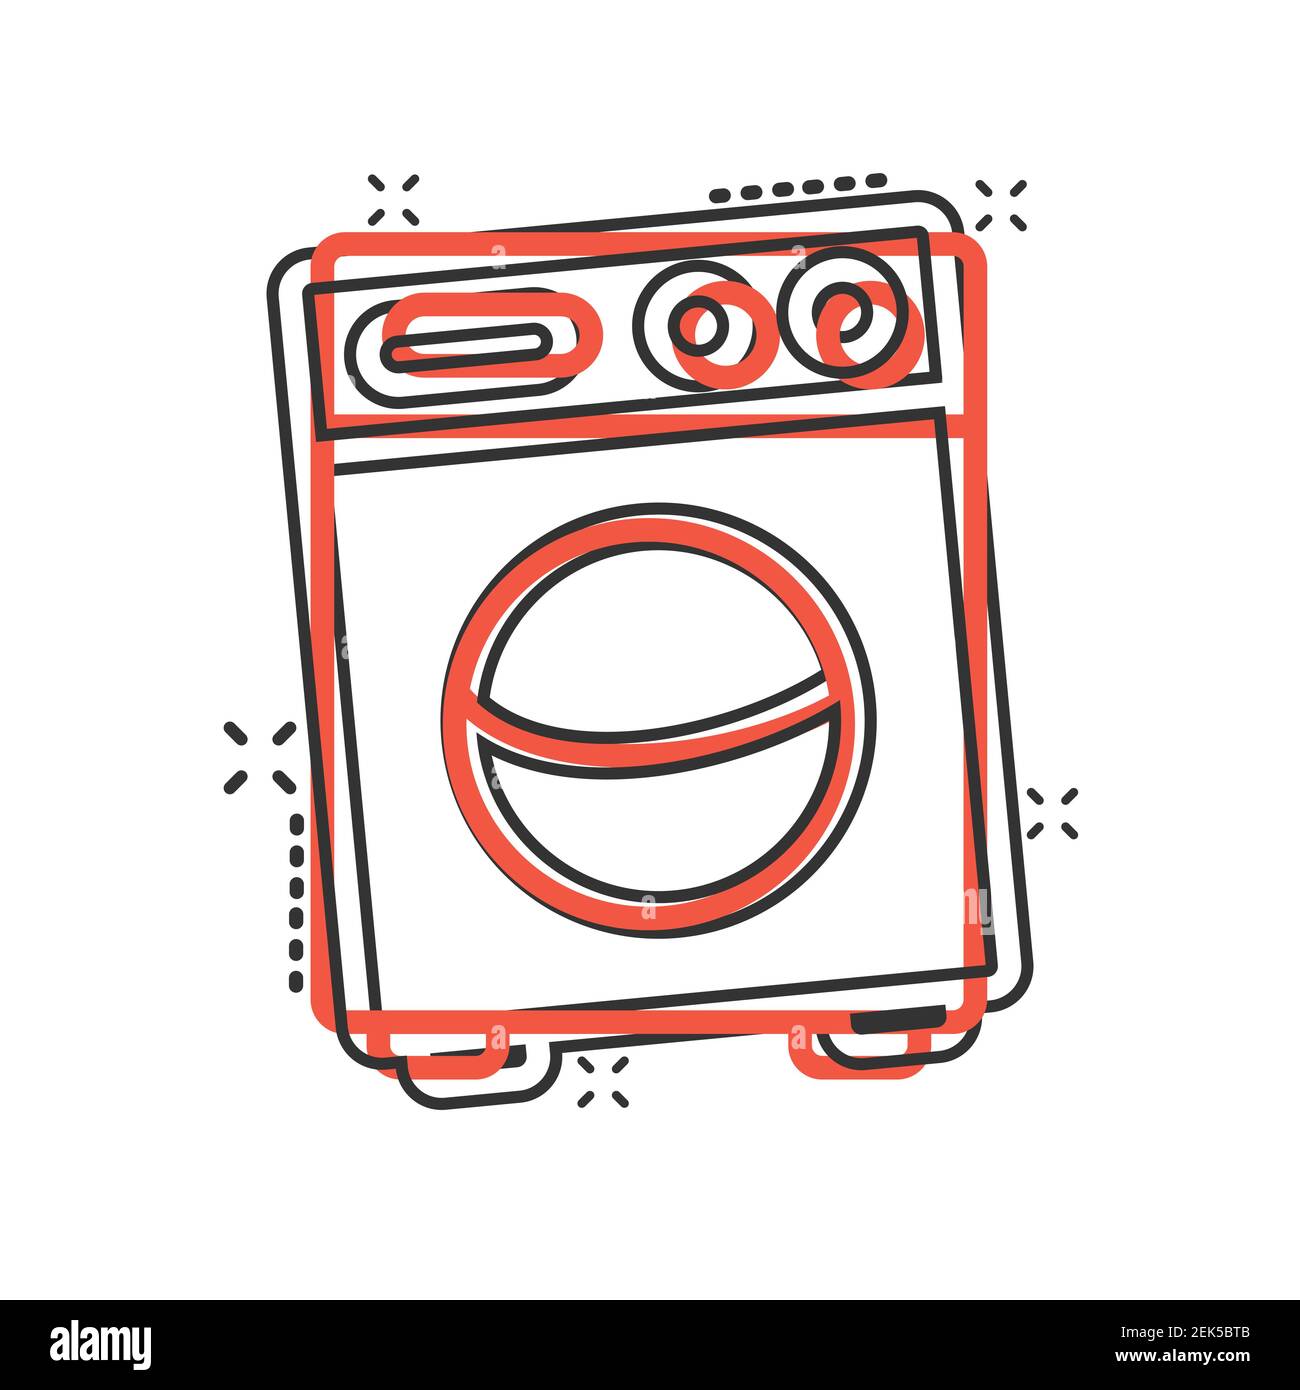 Laundry Basket Washing Machine Drawing Stock Vector | Royalty-Free |  FreeImages